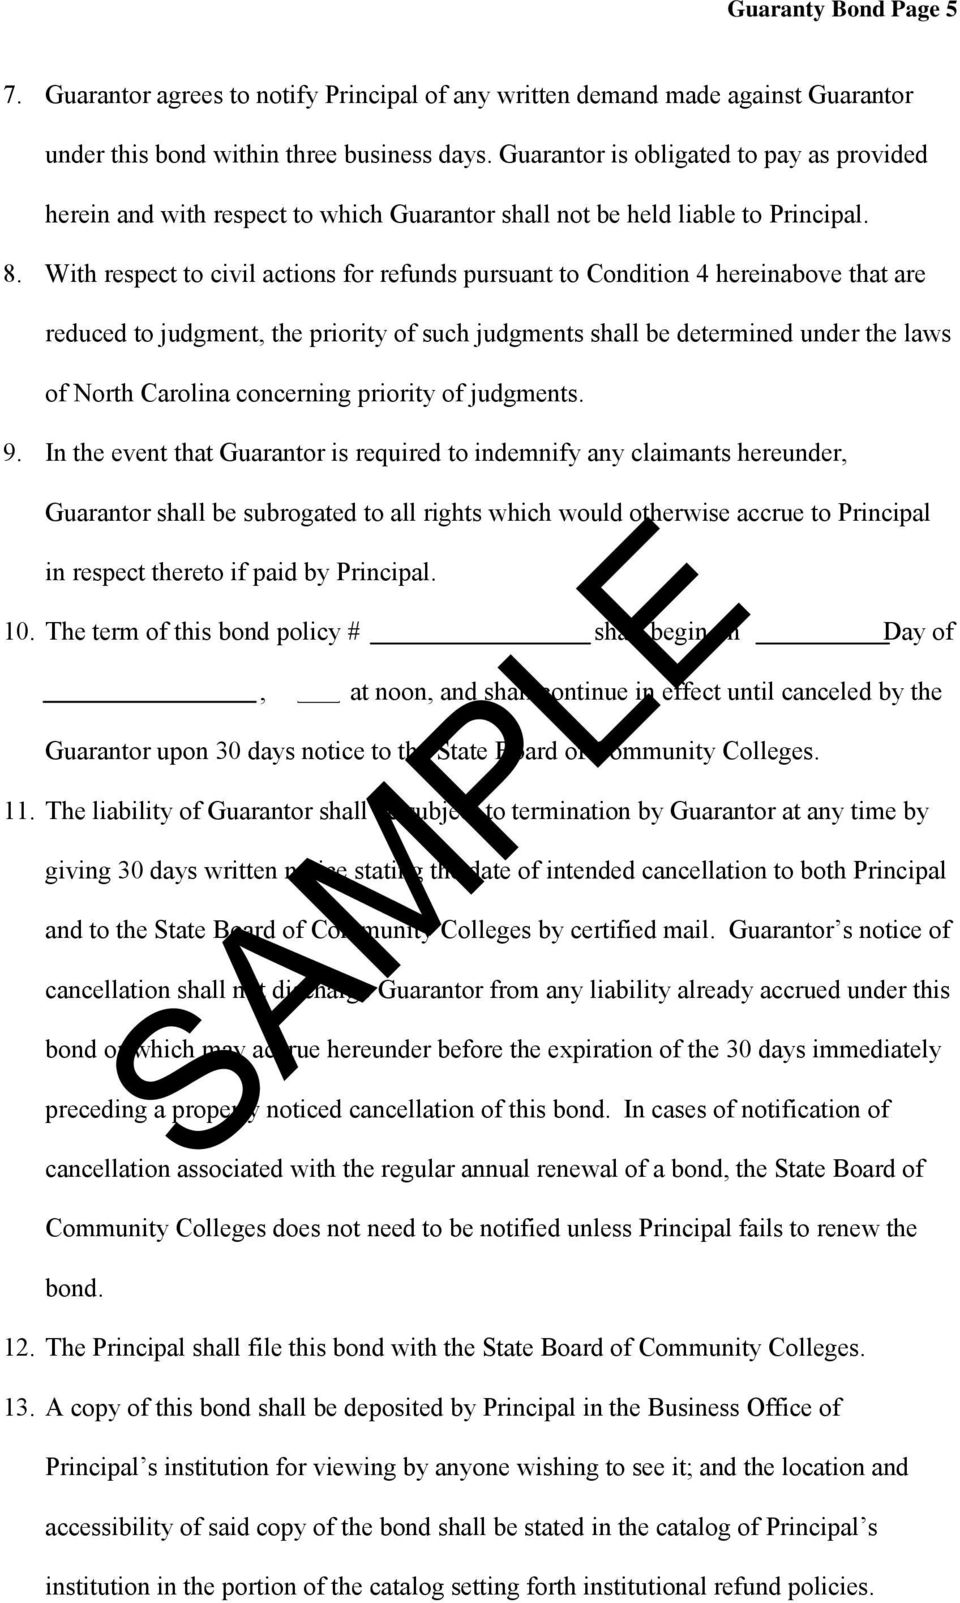 With respect to civil actions for refunds pursuant to Condition 4 hereinabove that are reduced to judgment, the priority of such judgments shall be determined under the laws of North Carolina